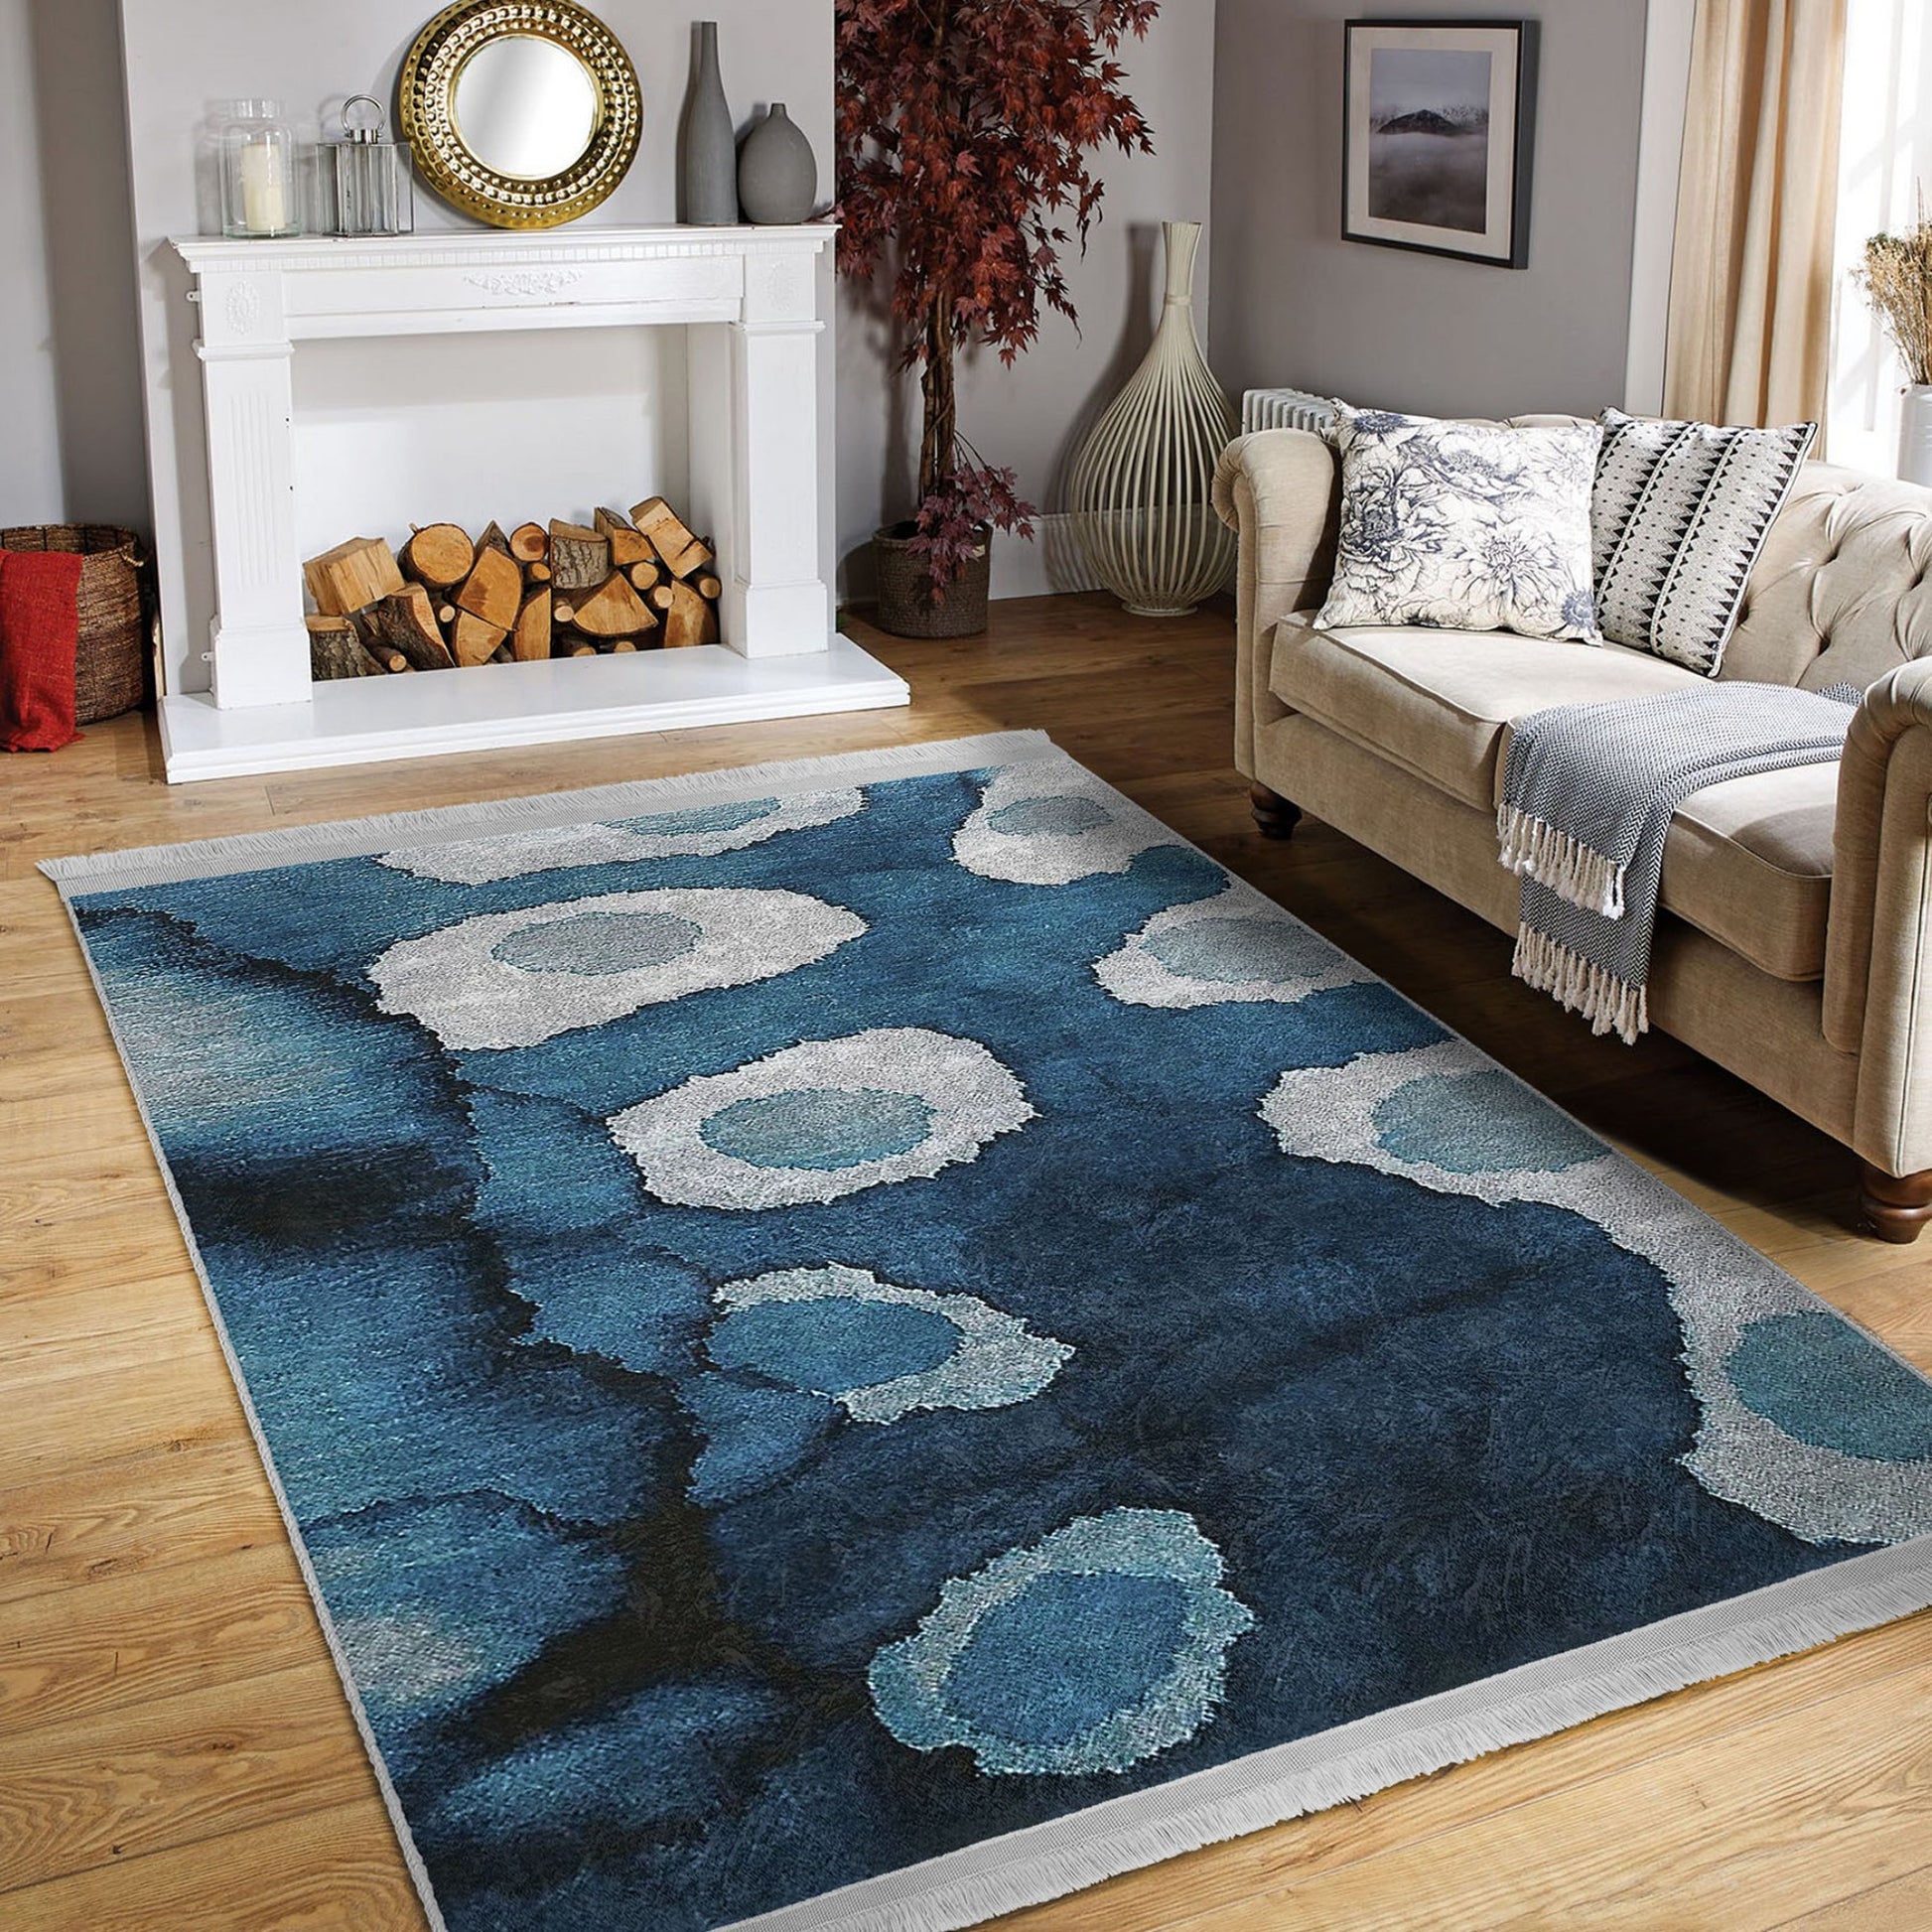 Decorative Area Rug with Calming Blue Ocean Patterns